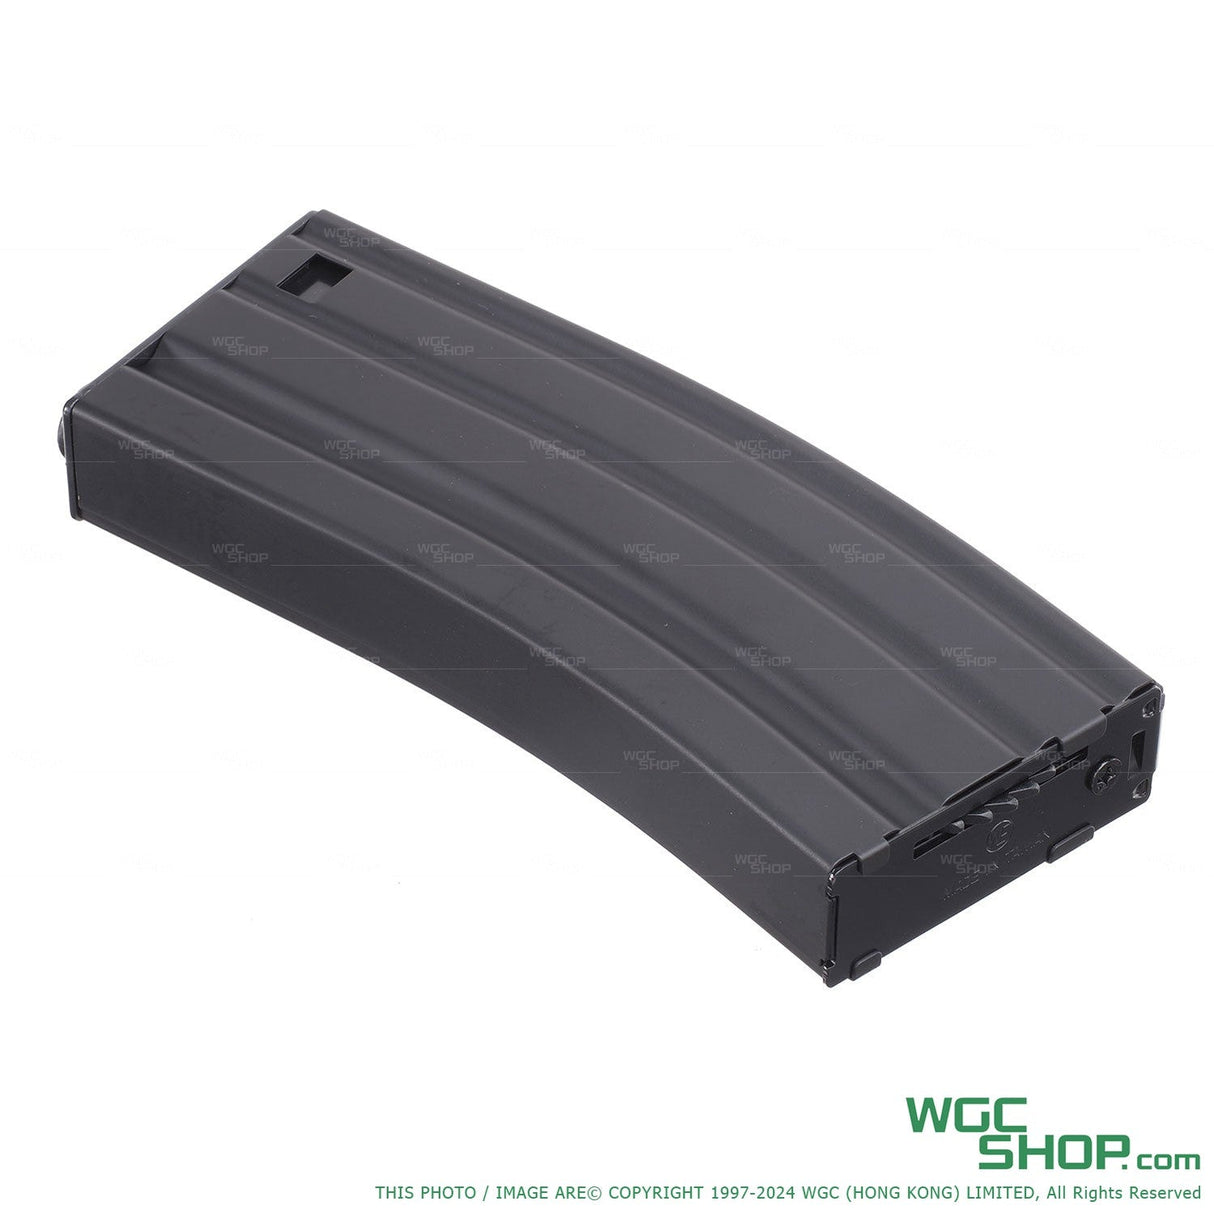 ARMORER WORKS K05010 HPA / M4 Magazine Complete Adaptor for Hi-Capa GBB Airsoft